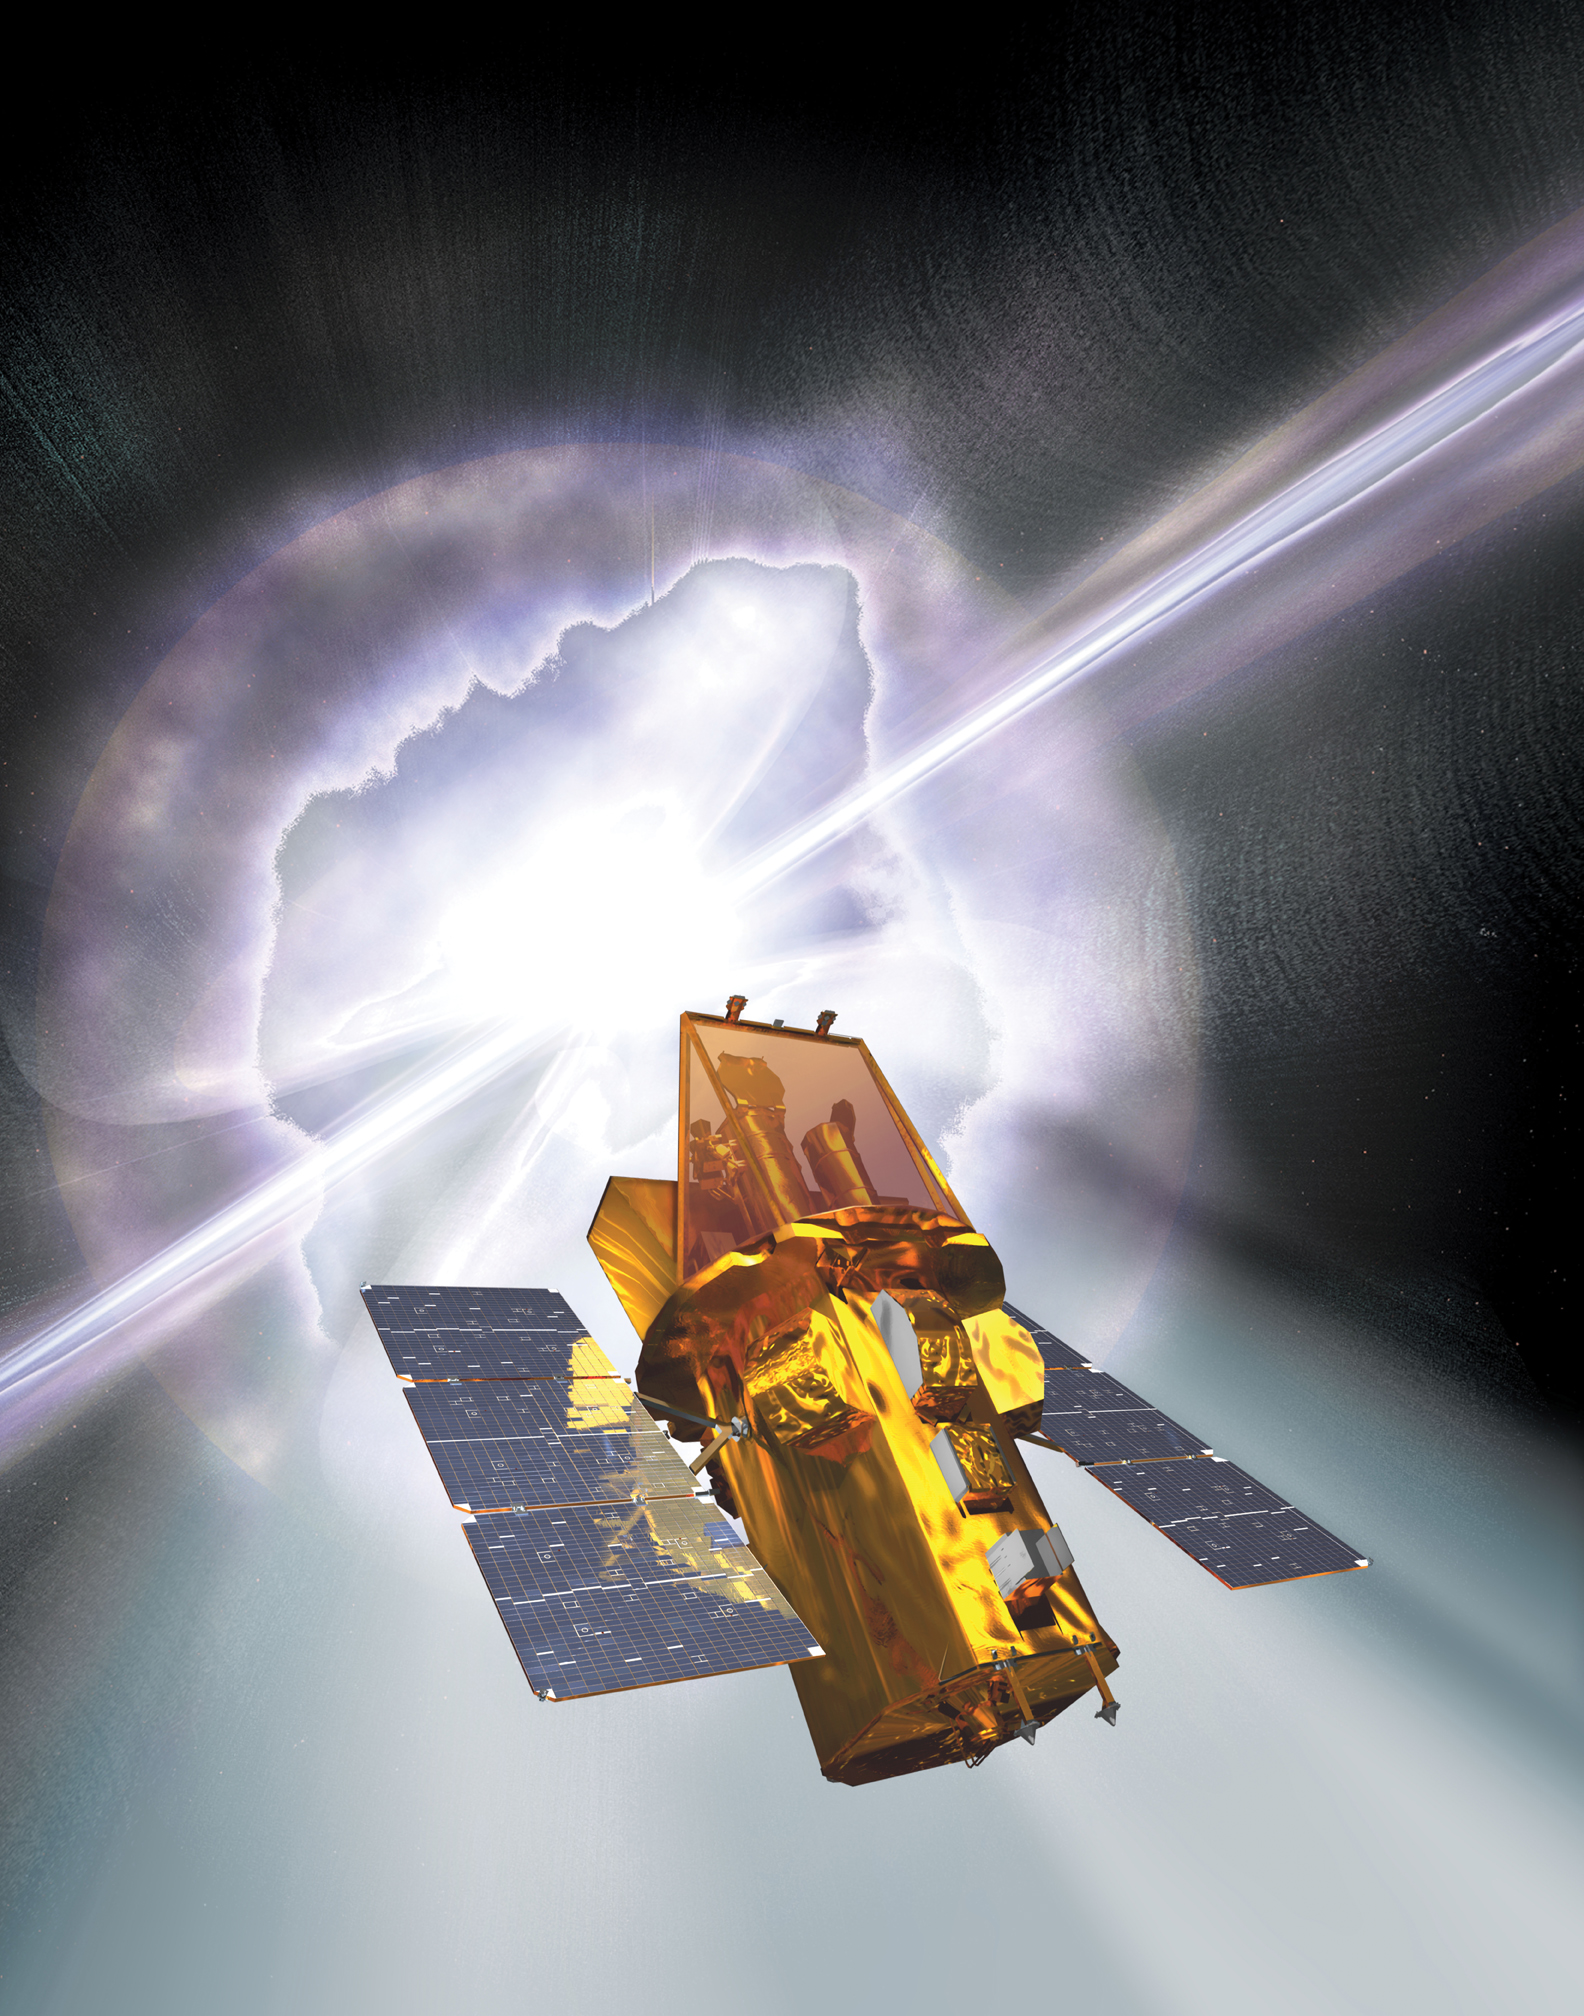 Illustration of the Swift satellite in space